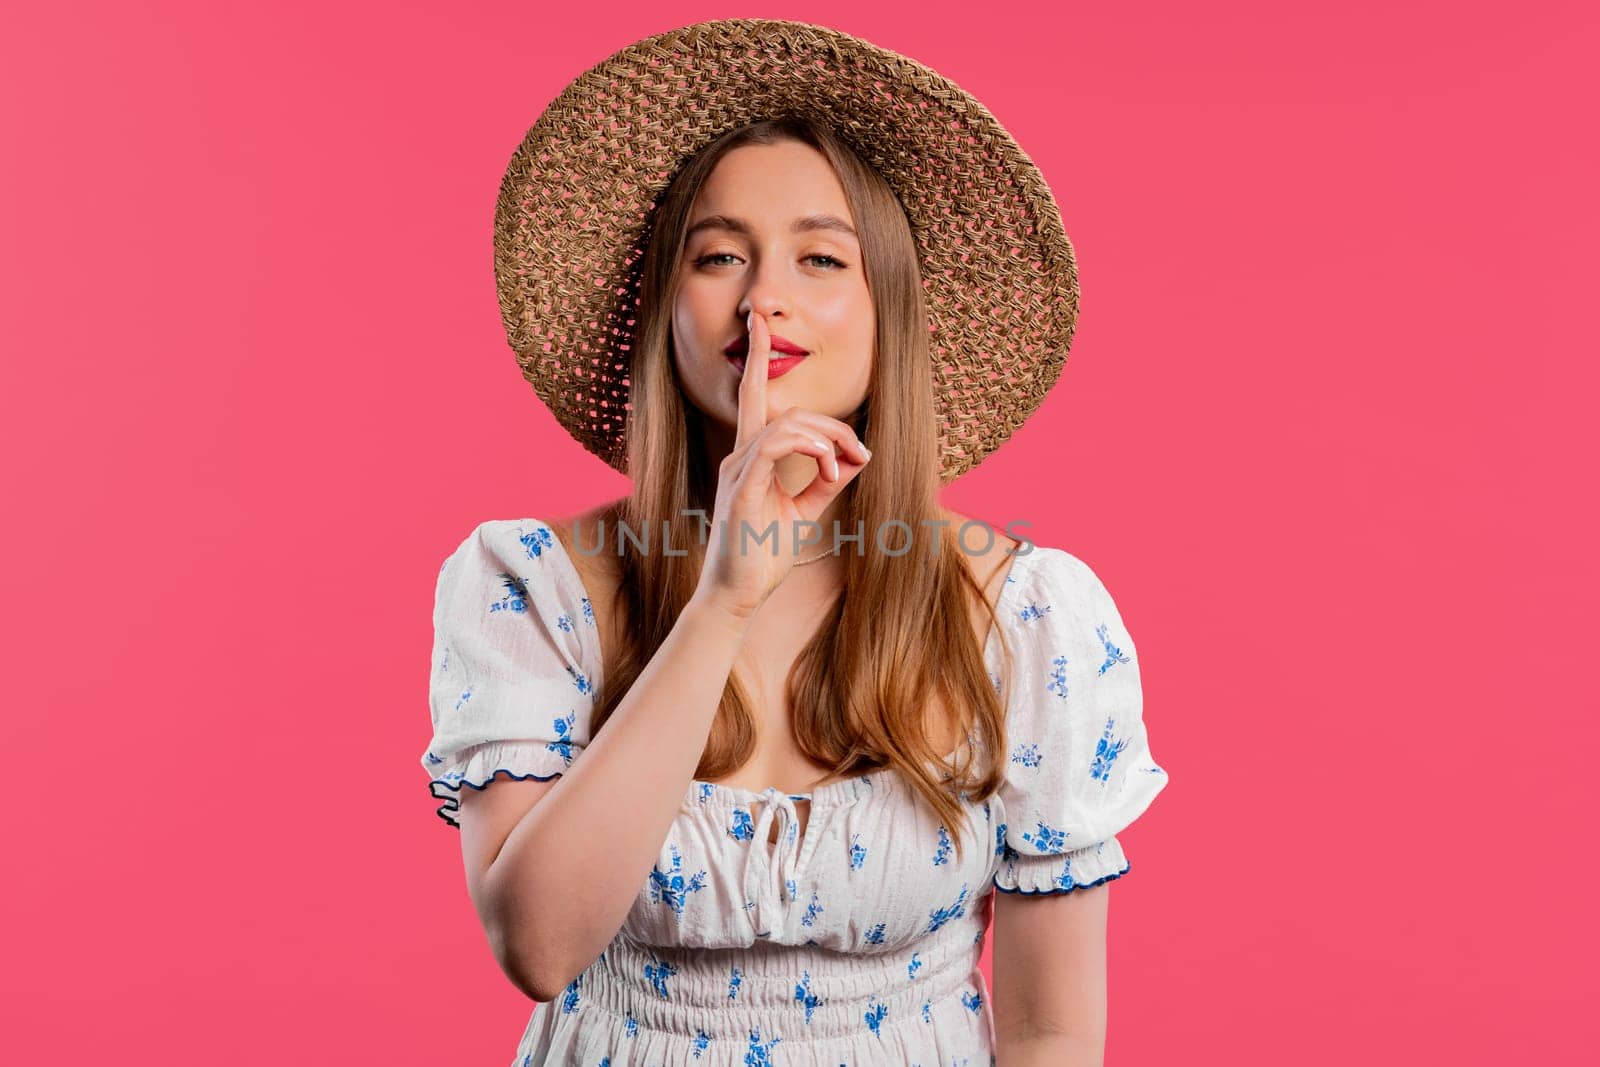 Smiling ukrainian woman holding finger on lips, pink studio background. Pretty lady with gesture of shhh, secret, silence, conspiracy, gossip concept. High quality